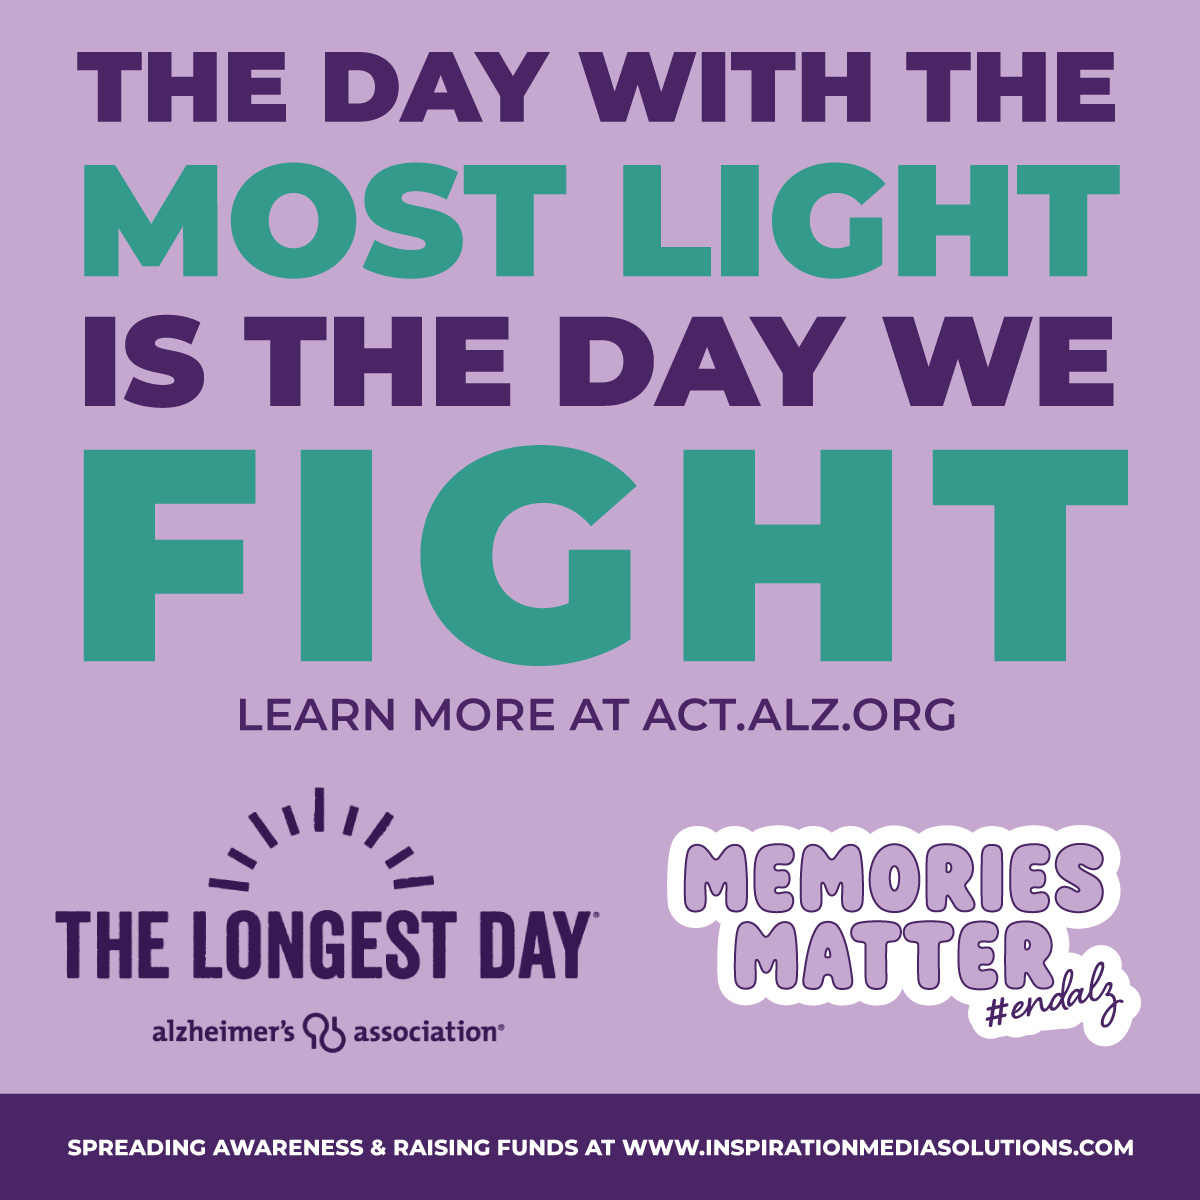 The Longest Day - The day with the most light is the day we fight